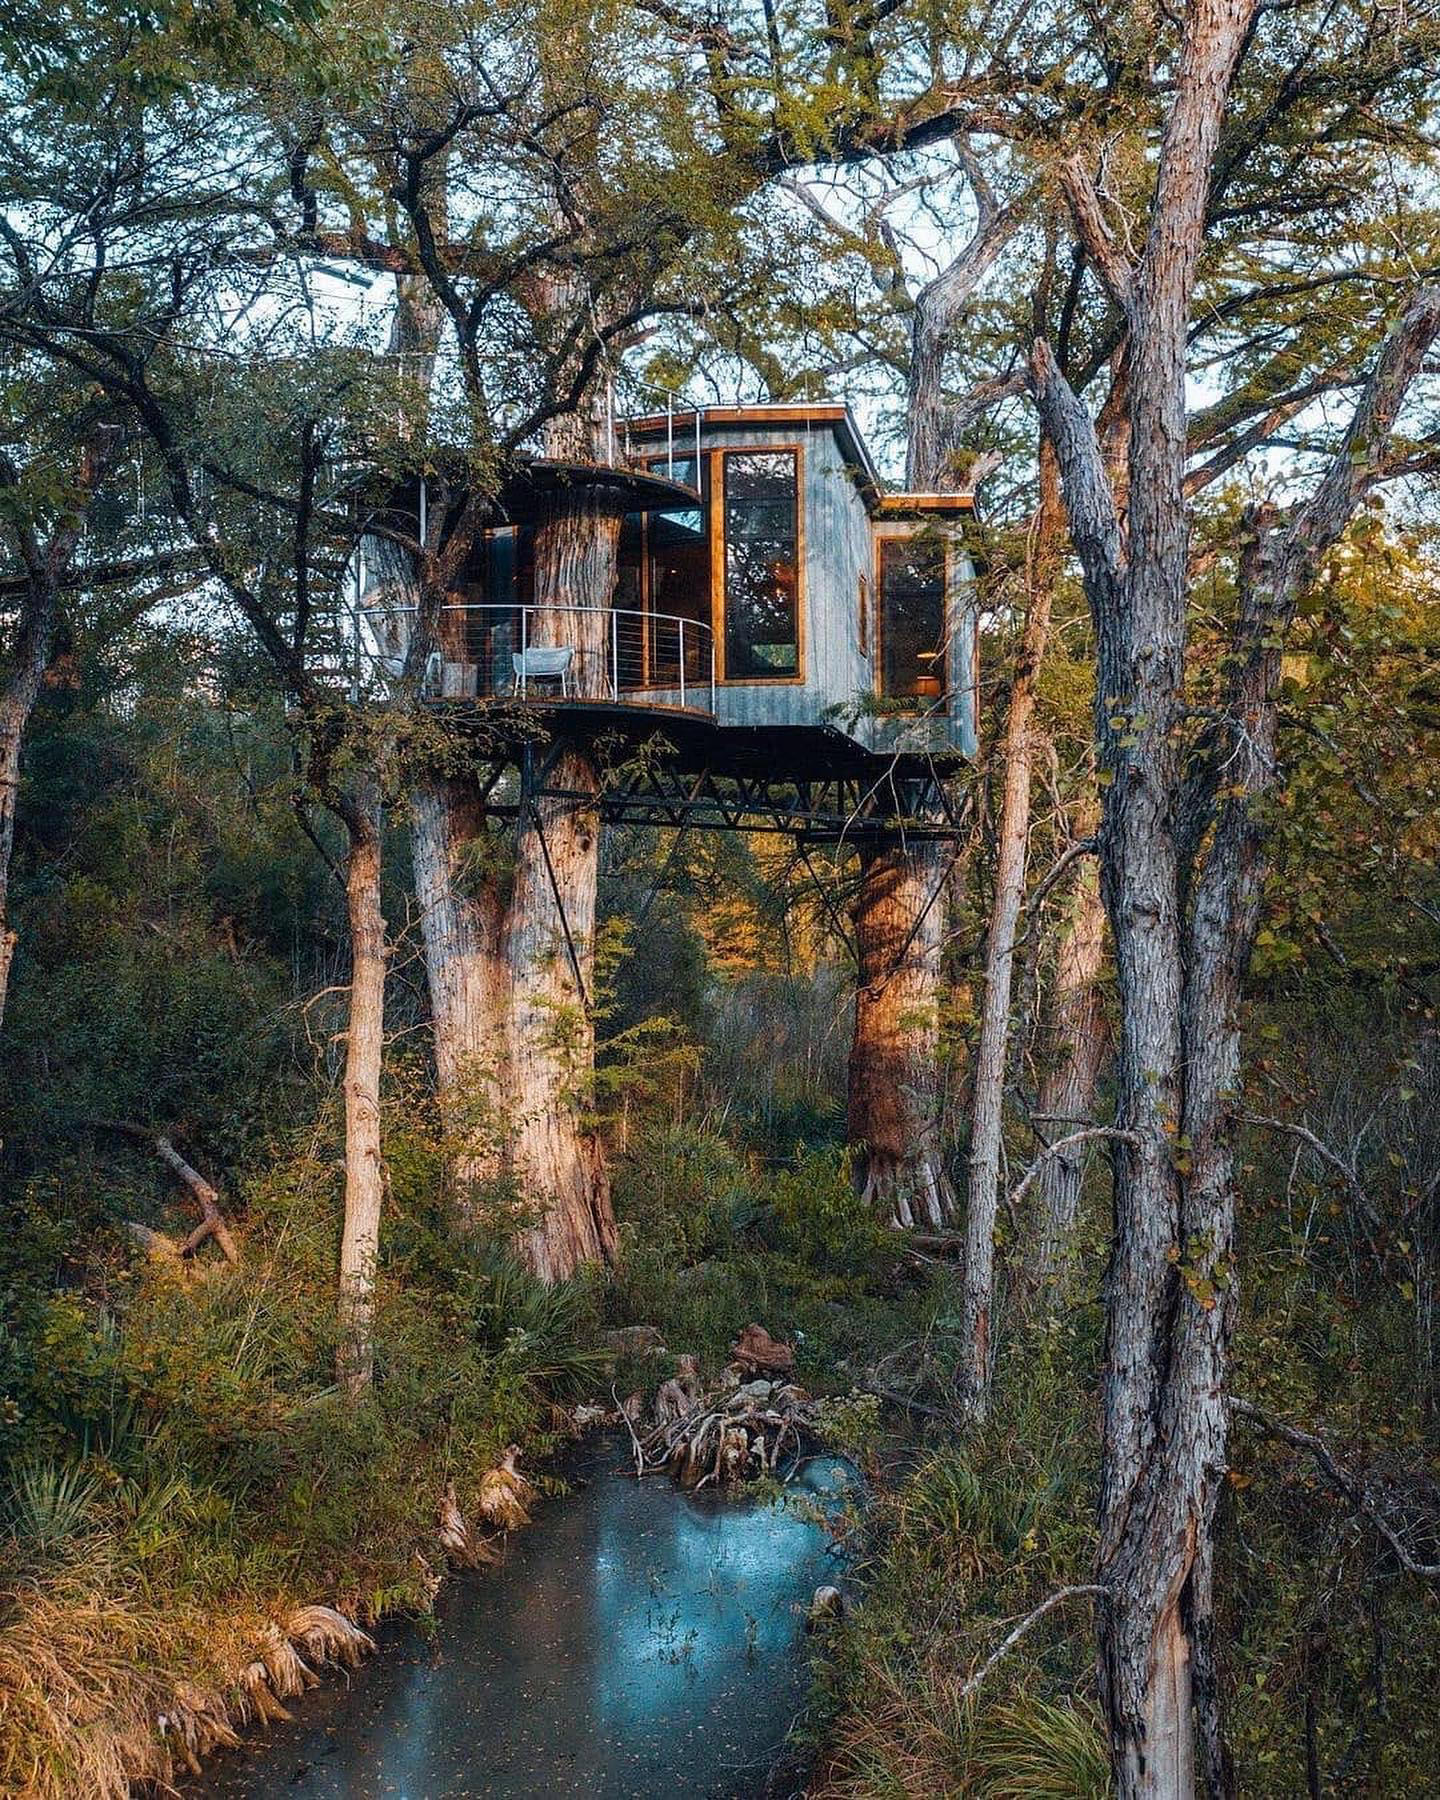 image  1 Architecture and Design - Tag someone you want to stay with in this tree house